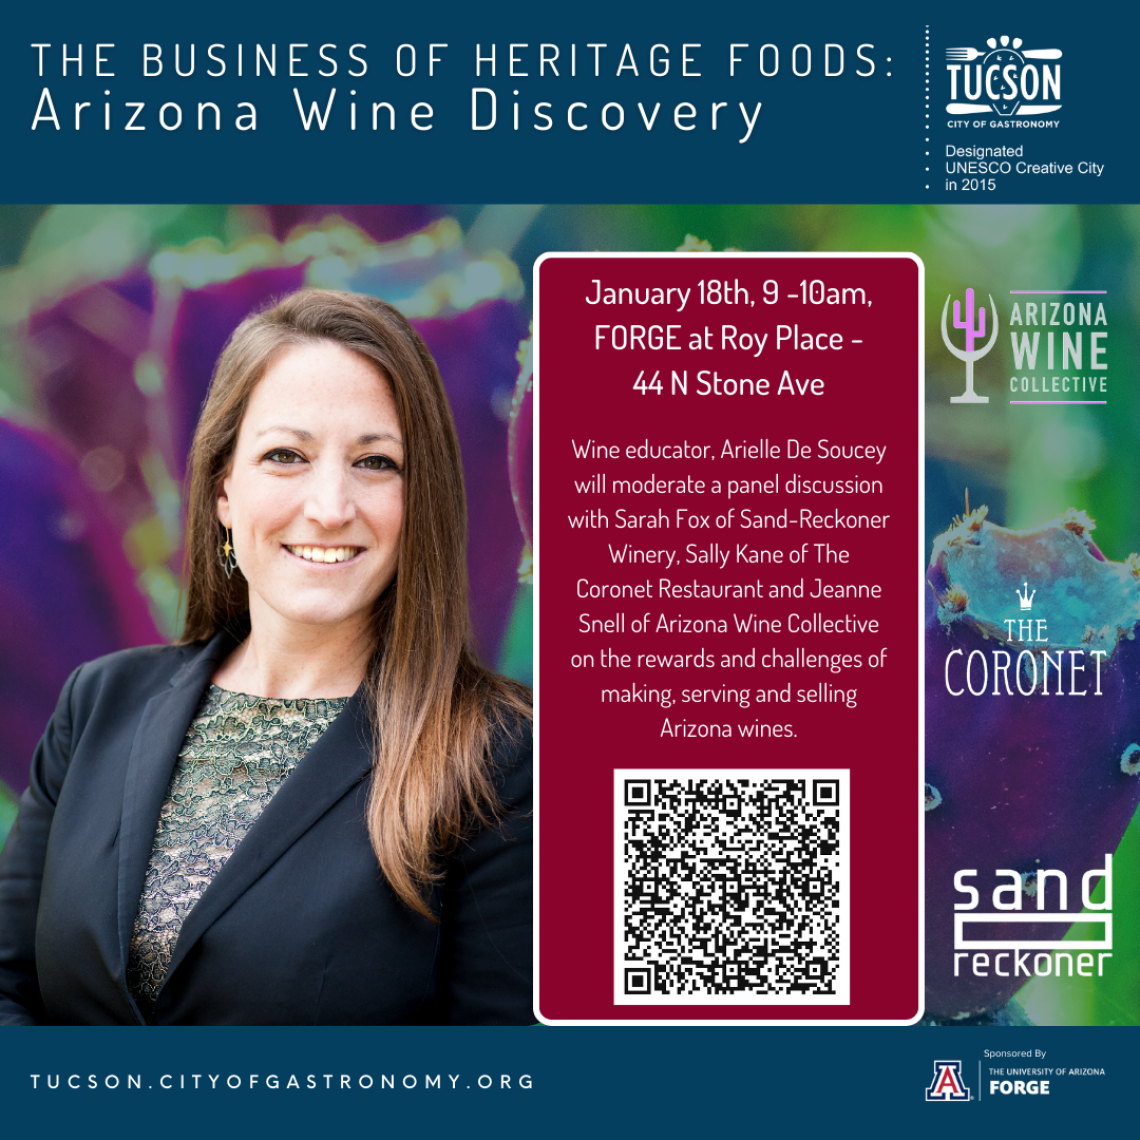 The Business of Heritage Foods - Arizona Wine Discovery